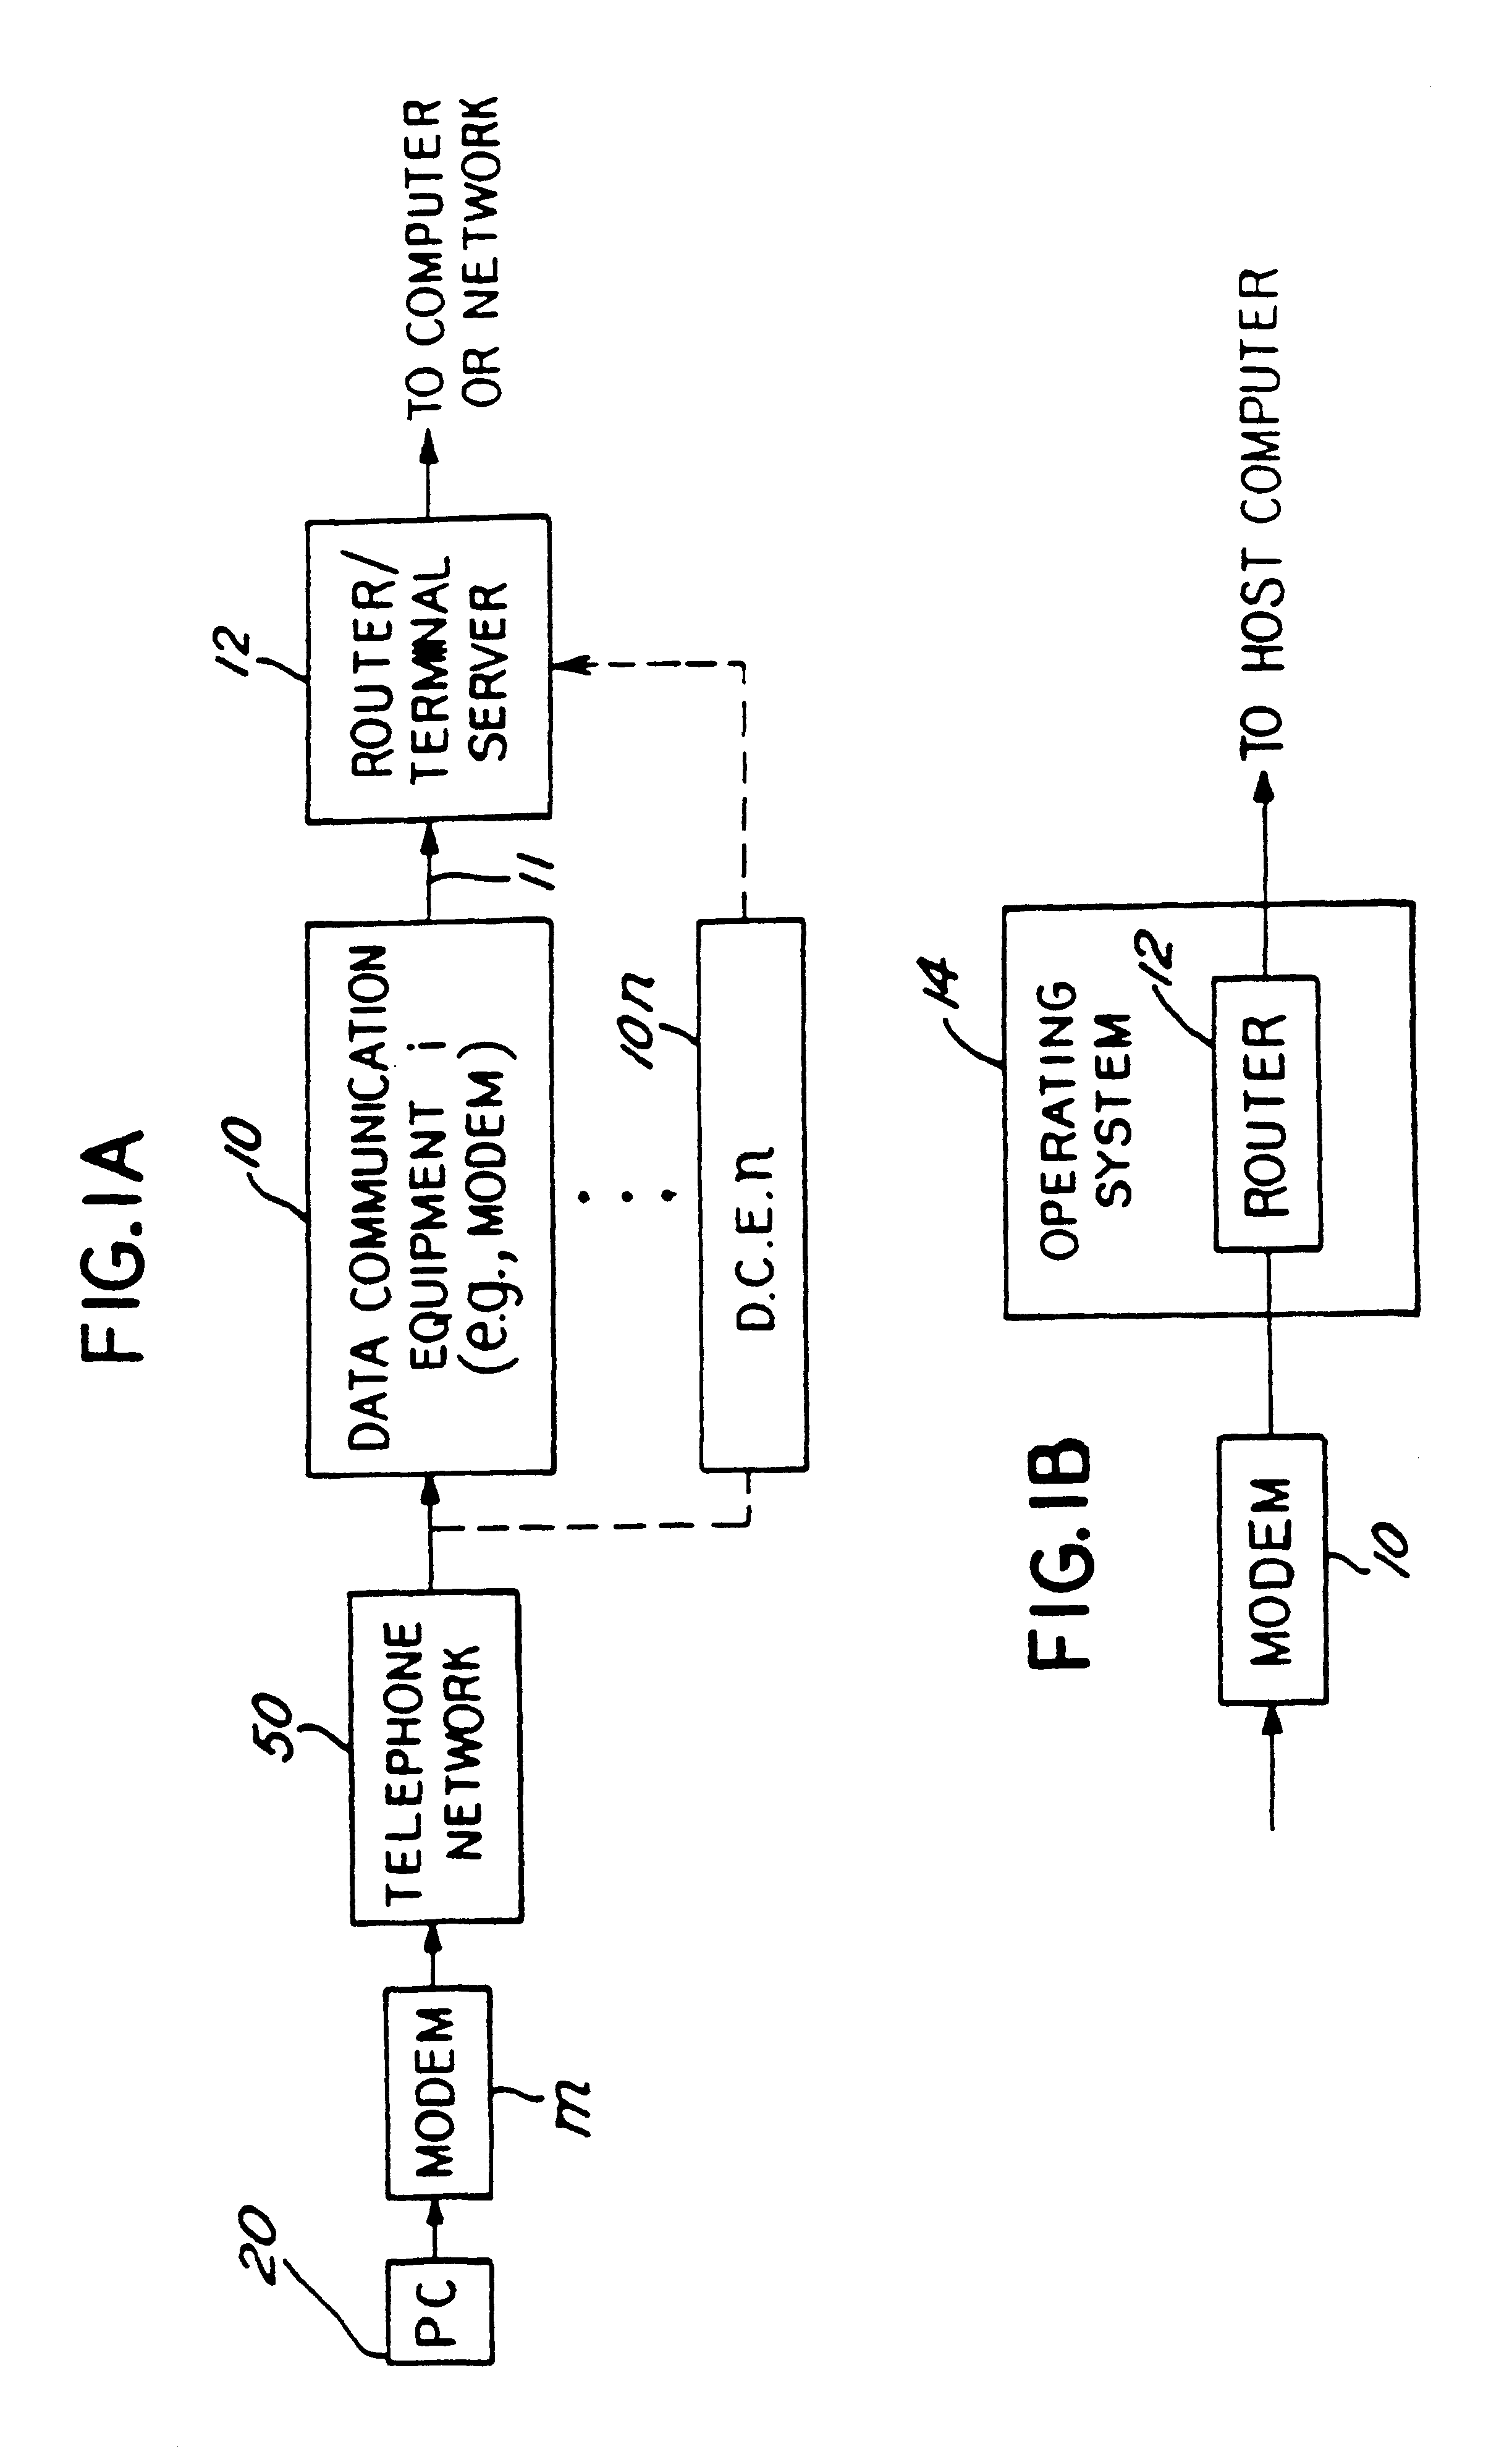 Distributed processing of high level protocols, in a network access server